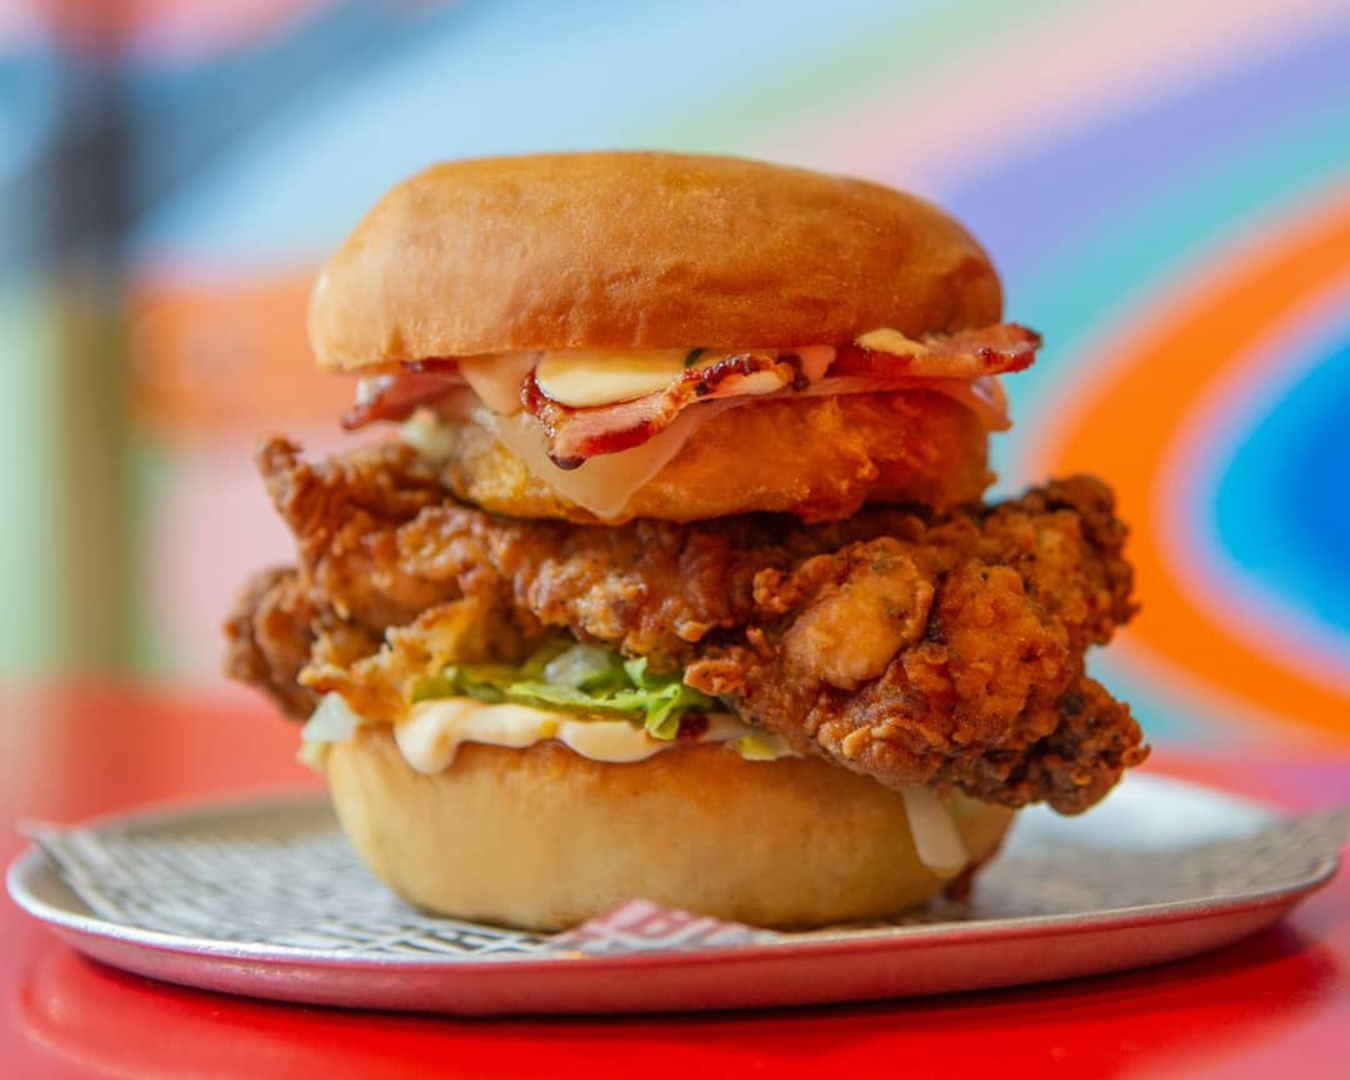 Up close and personal with a delicious, crispy fried chicken burger from Burger Liquor